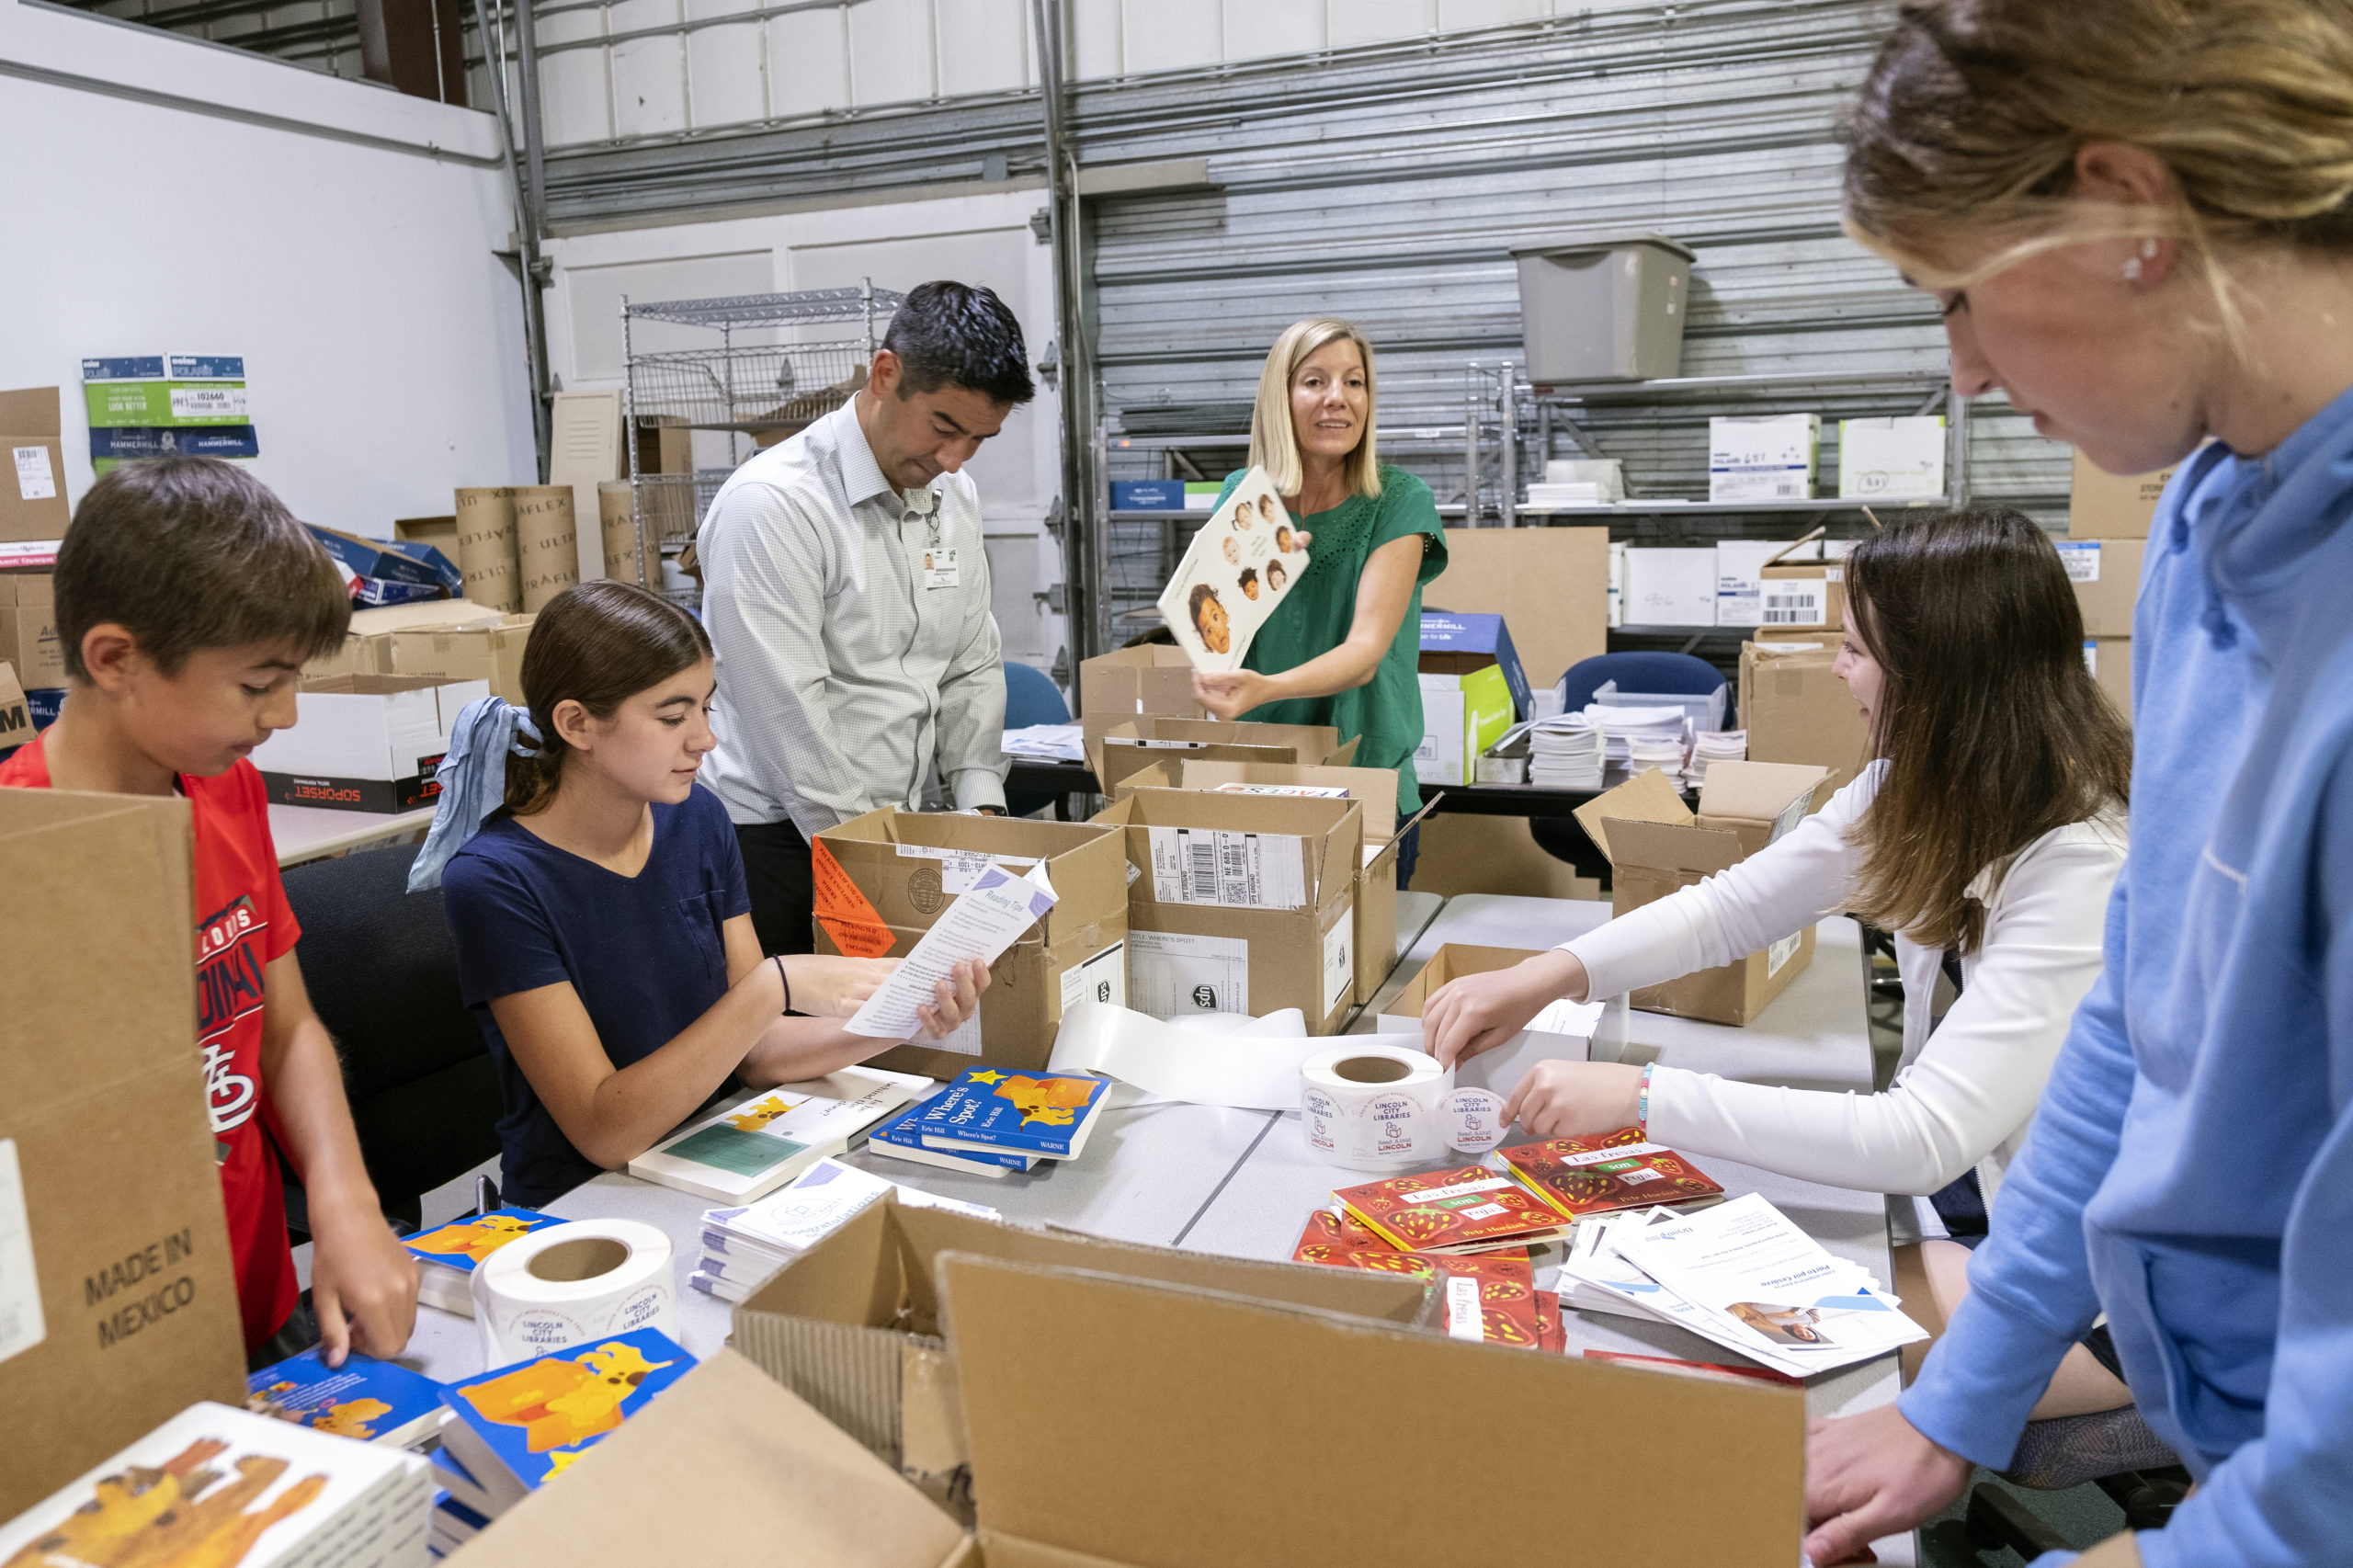 A group of volunteers work to repackage board books for distribution to local hospitals as part of the Books for Babies program.